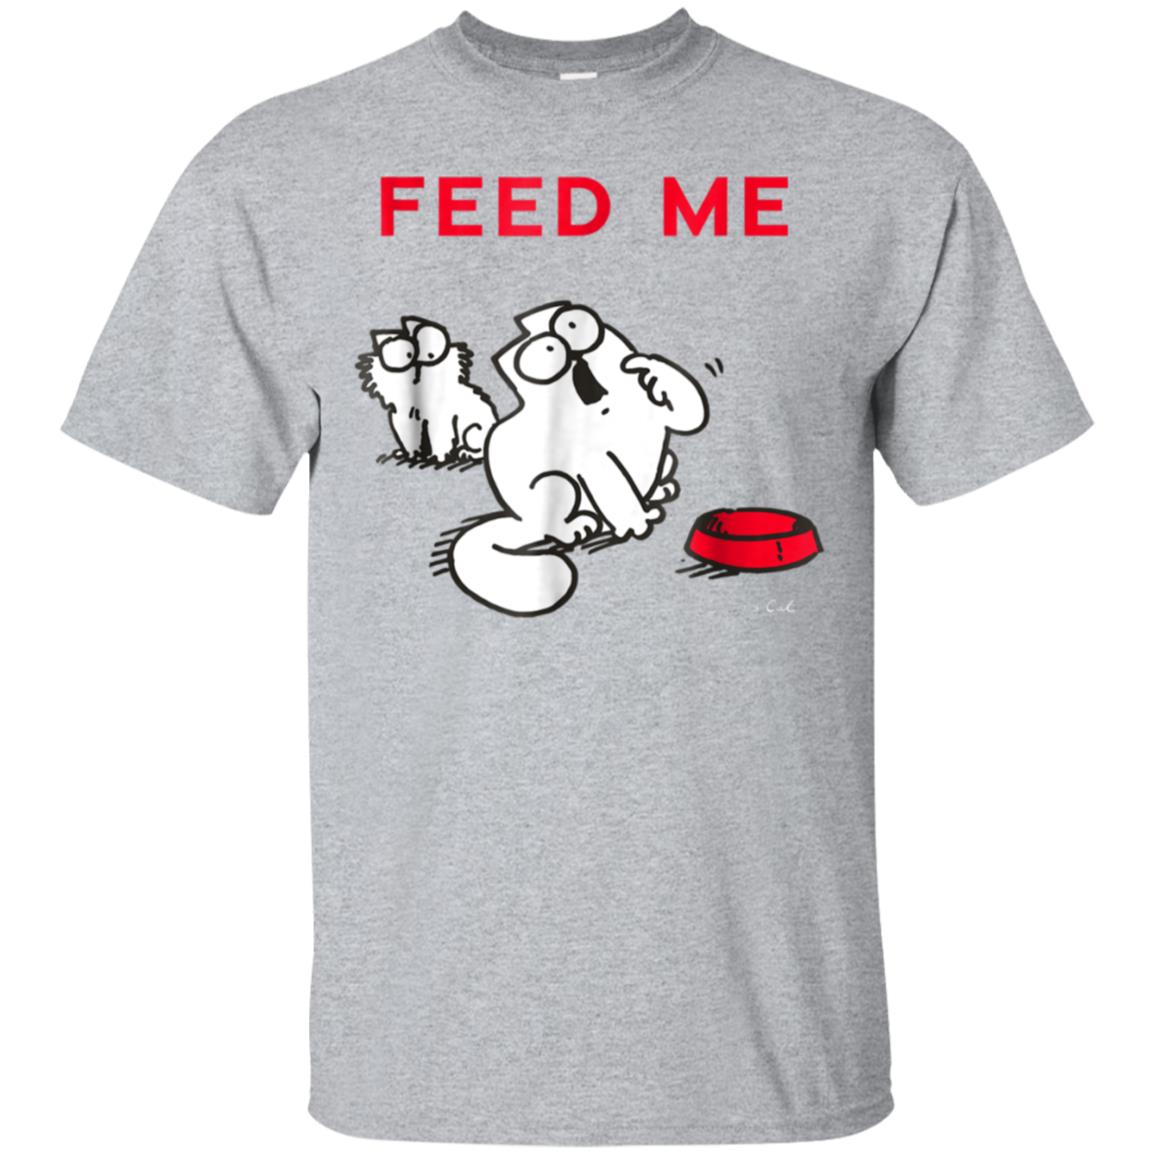 Awesome simon's cat feed me t shirt - 99promocode